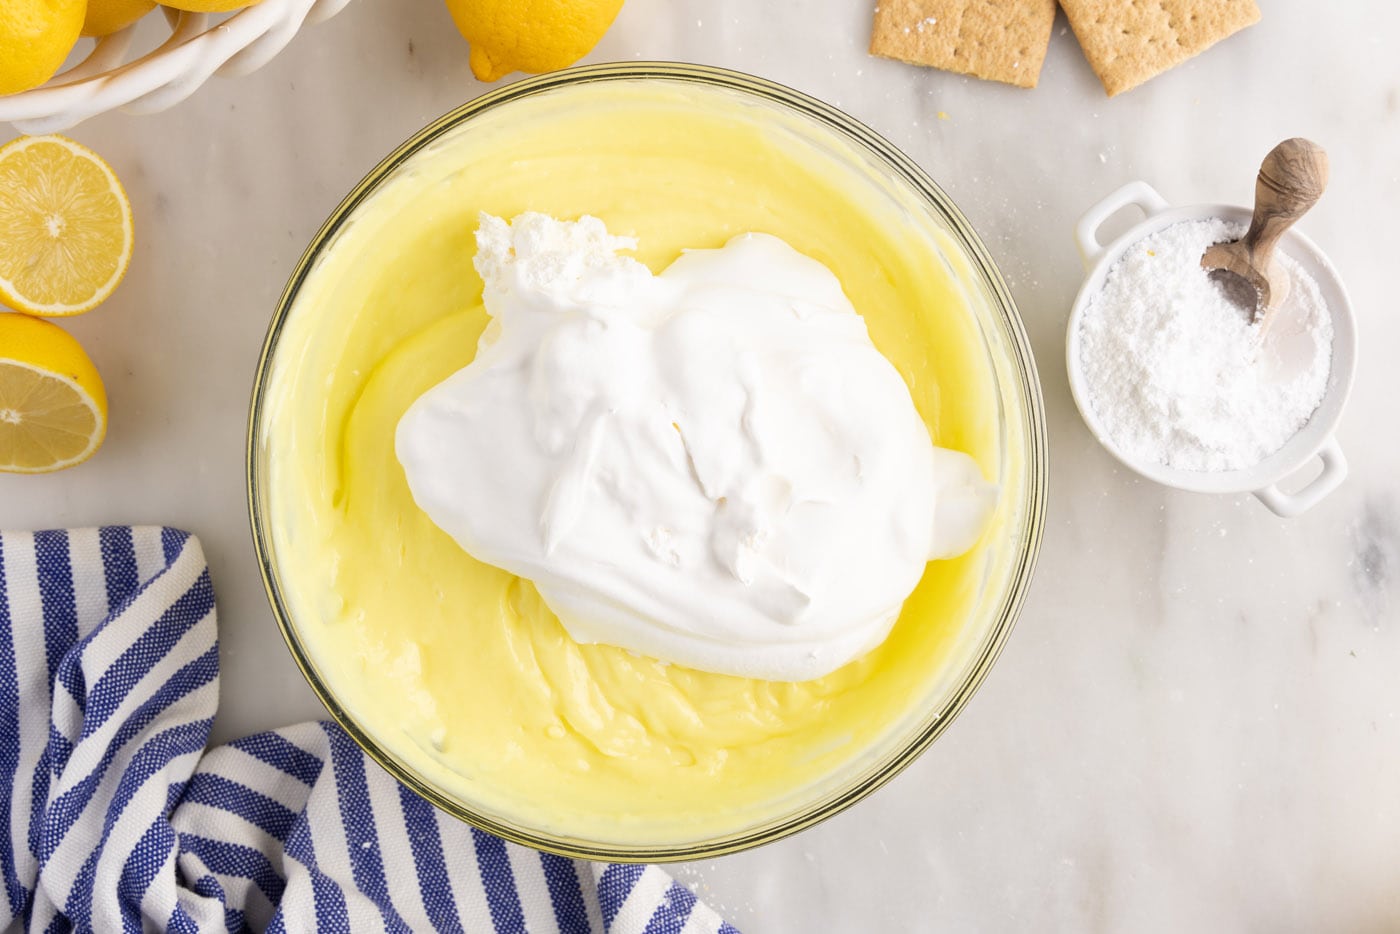 whipped topping. ontop of lemon pudding